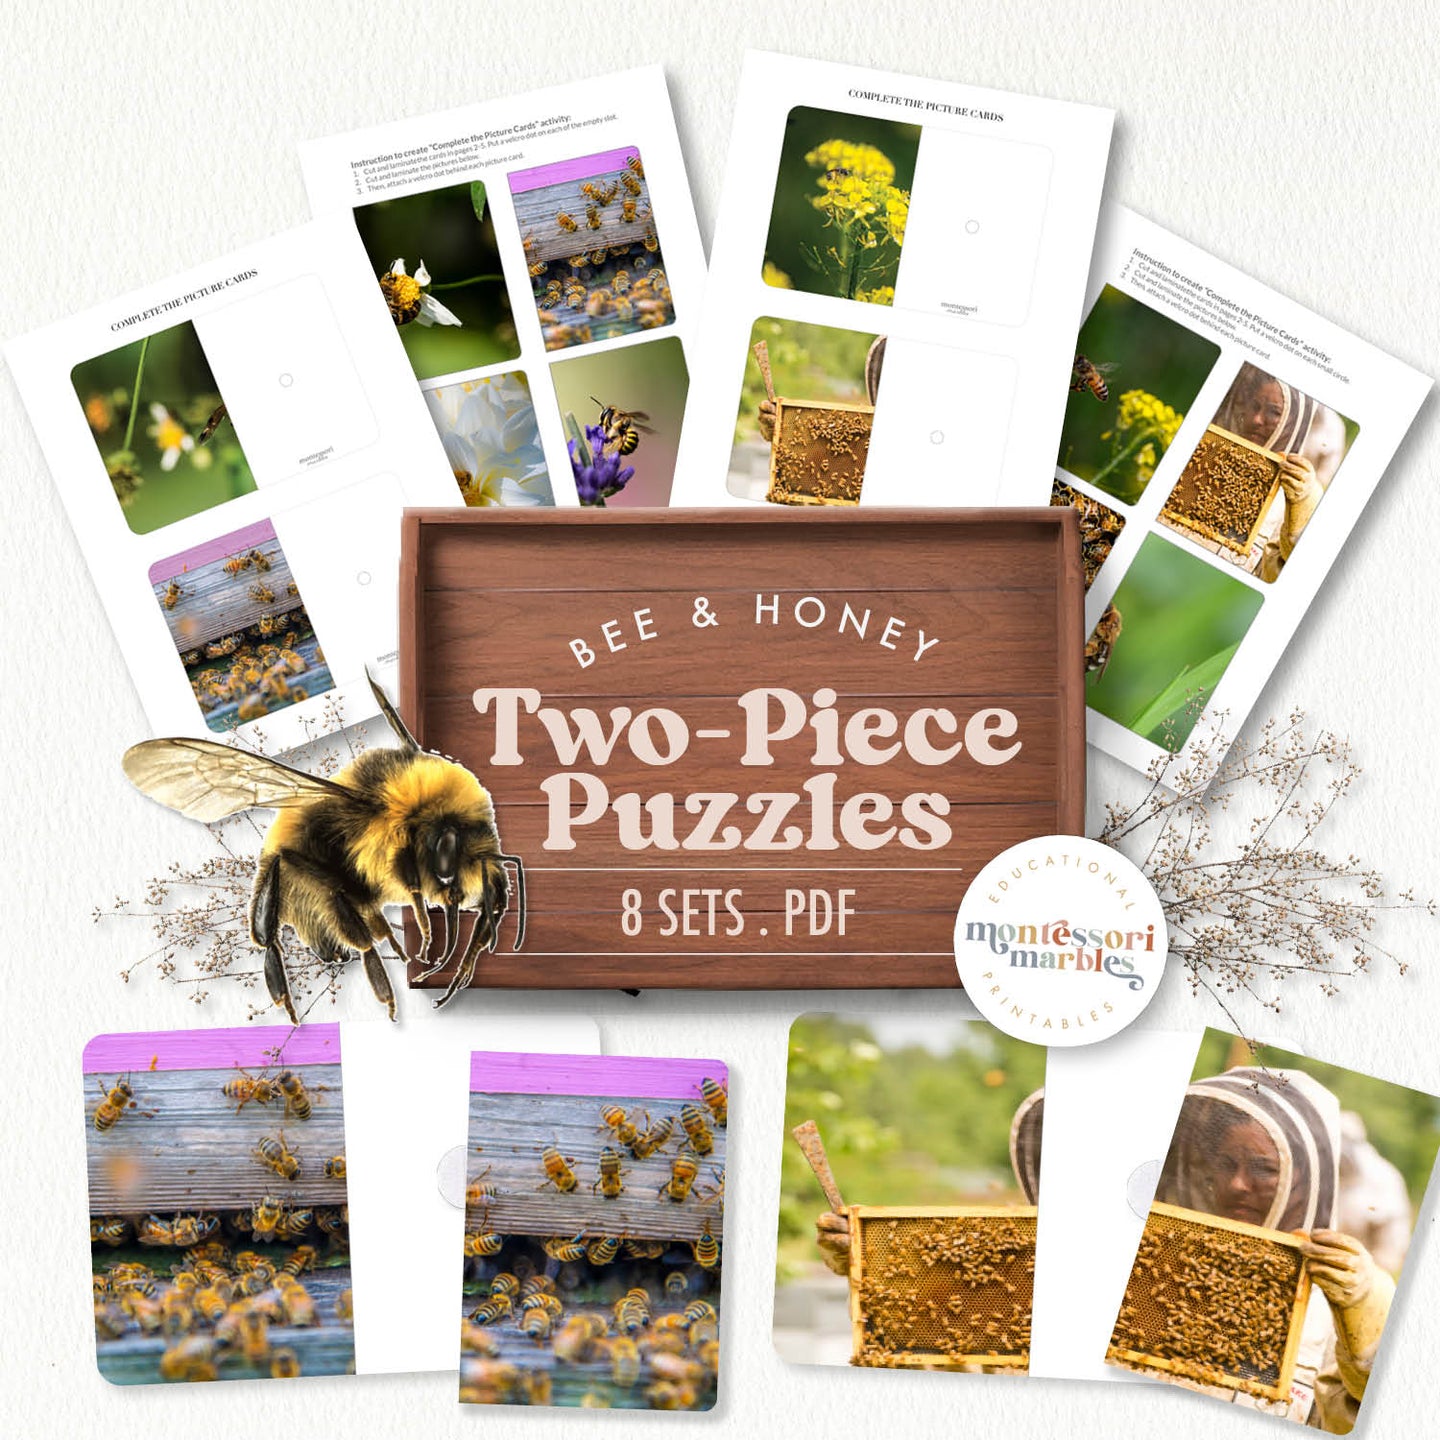 Bees Complete the Pictures